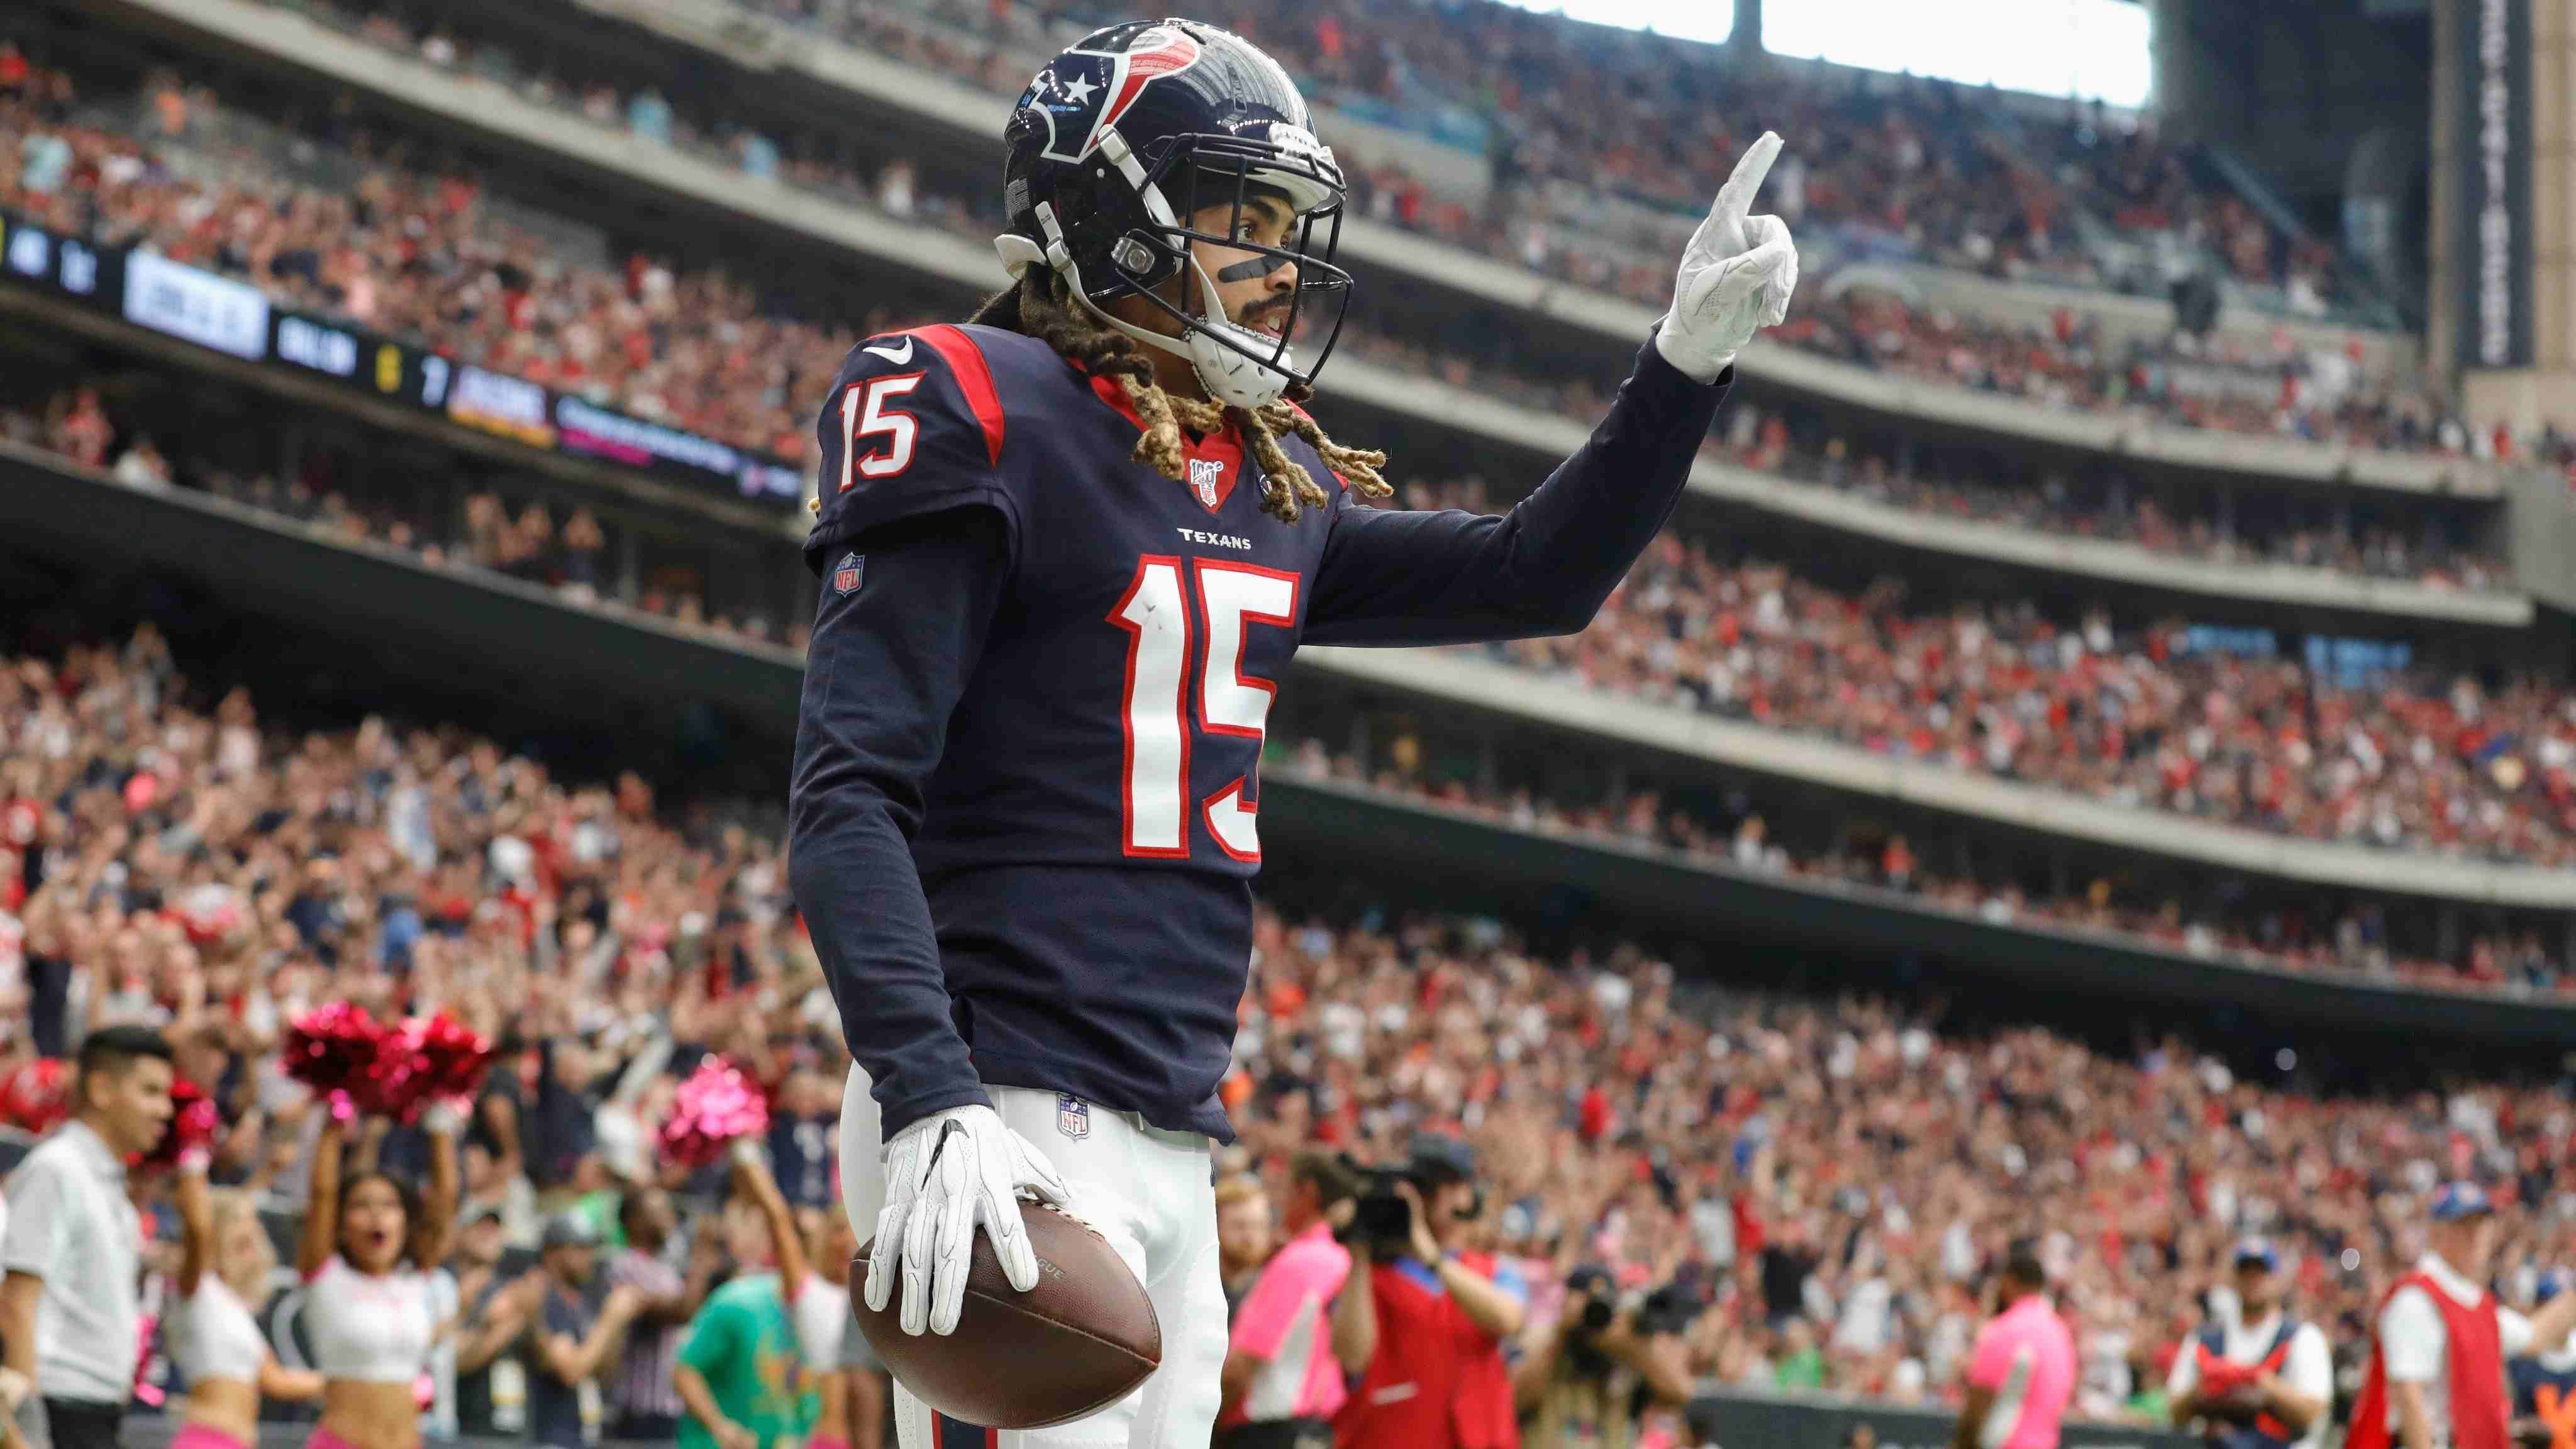 
                <strong>Houston Texans: Will Fuller</strong><br>
                
              